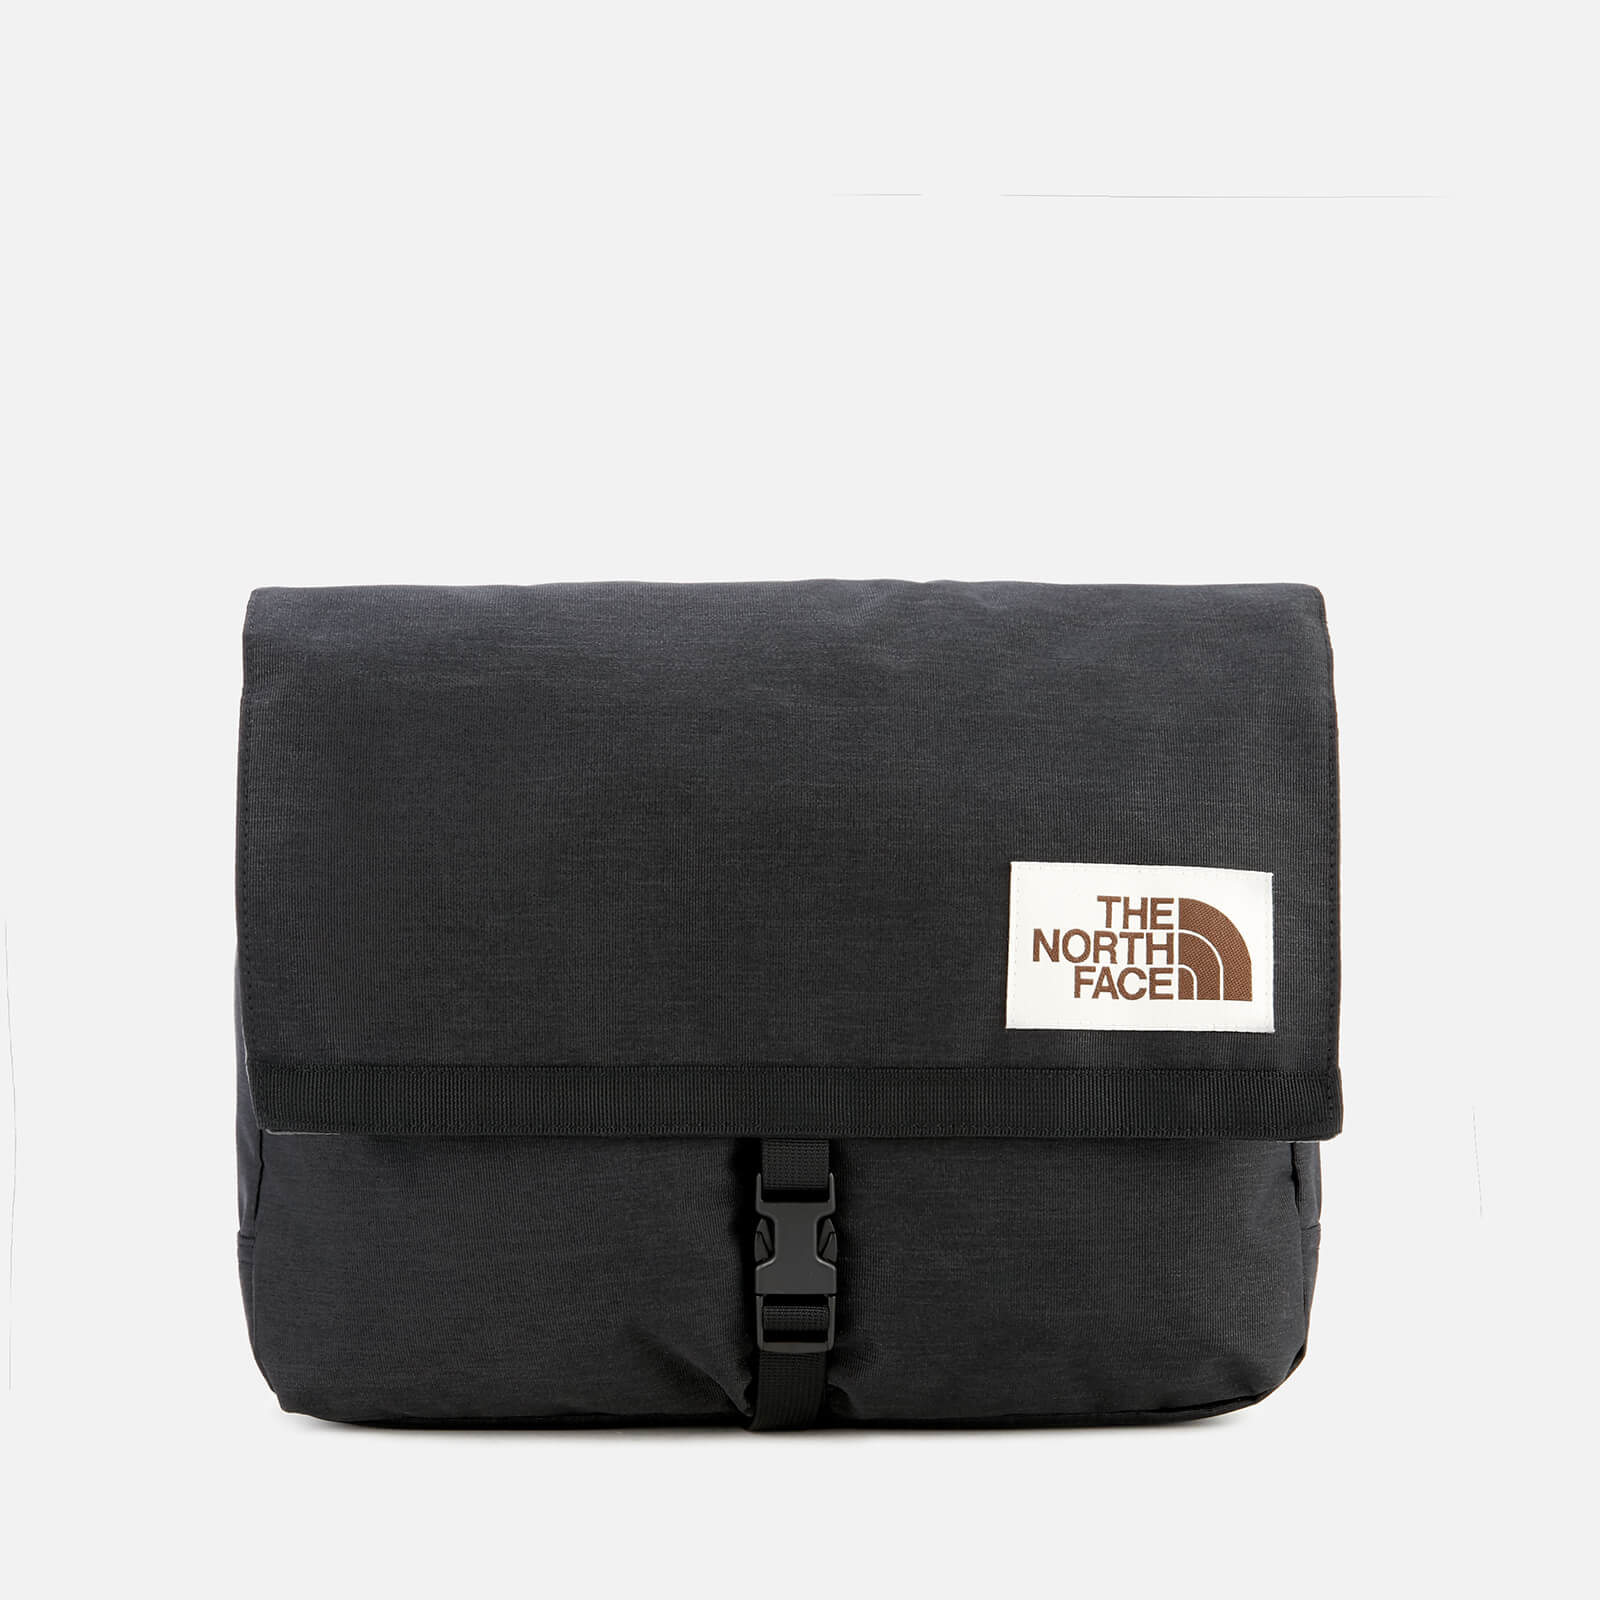 the north face satchel bag